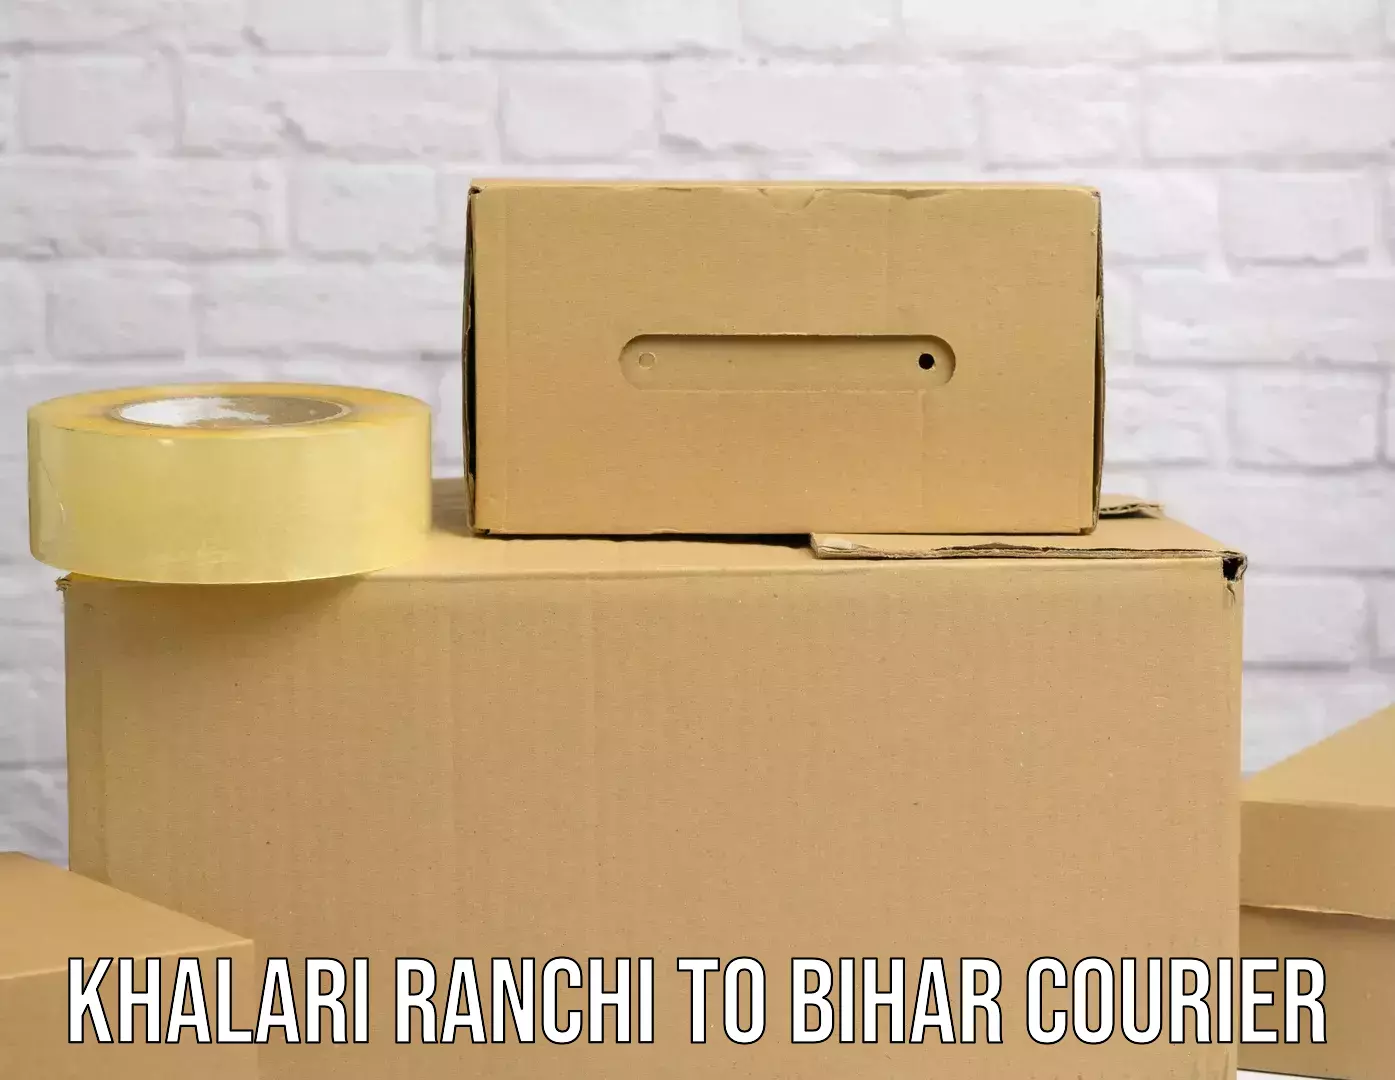 Postal and courier services Khalari Ranchi to Biraul